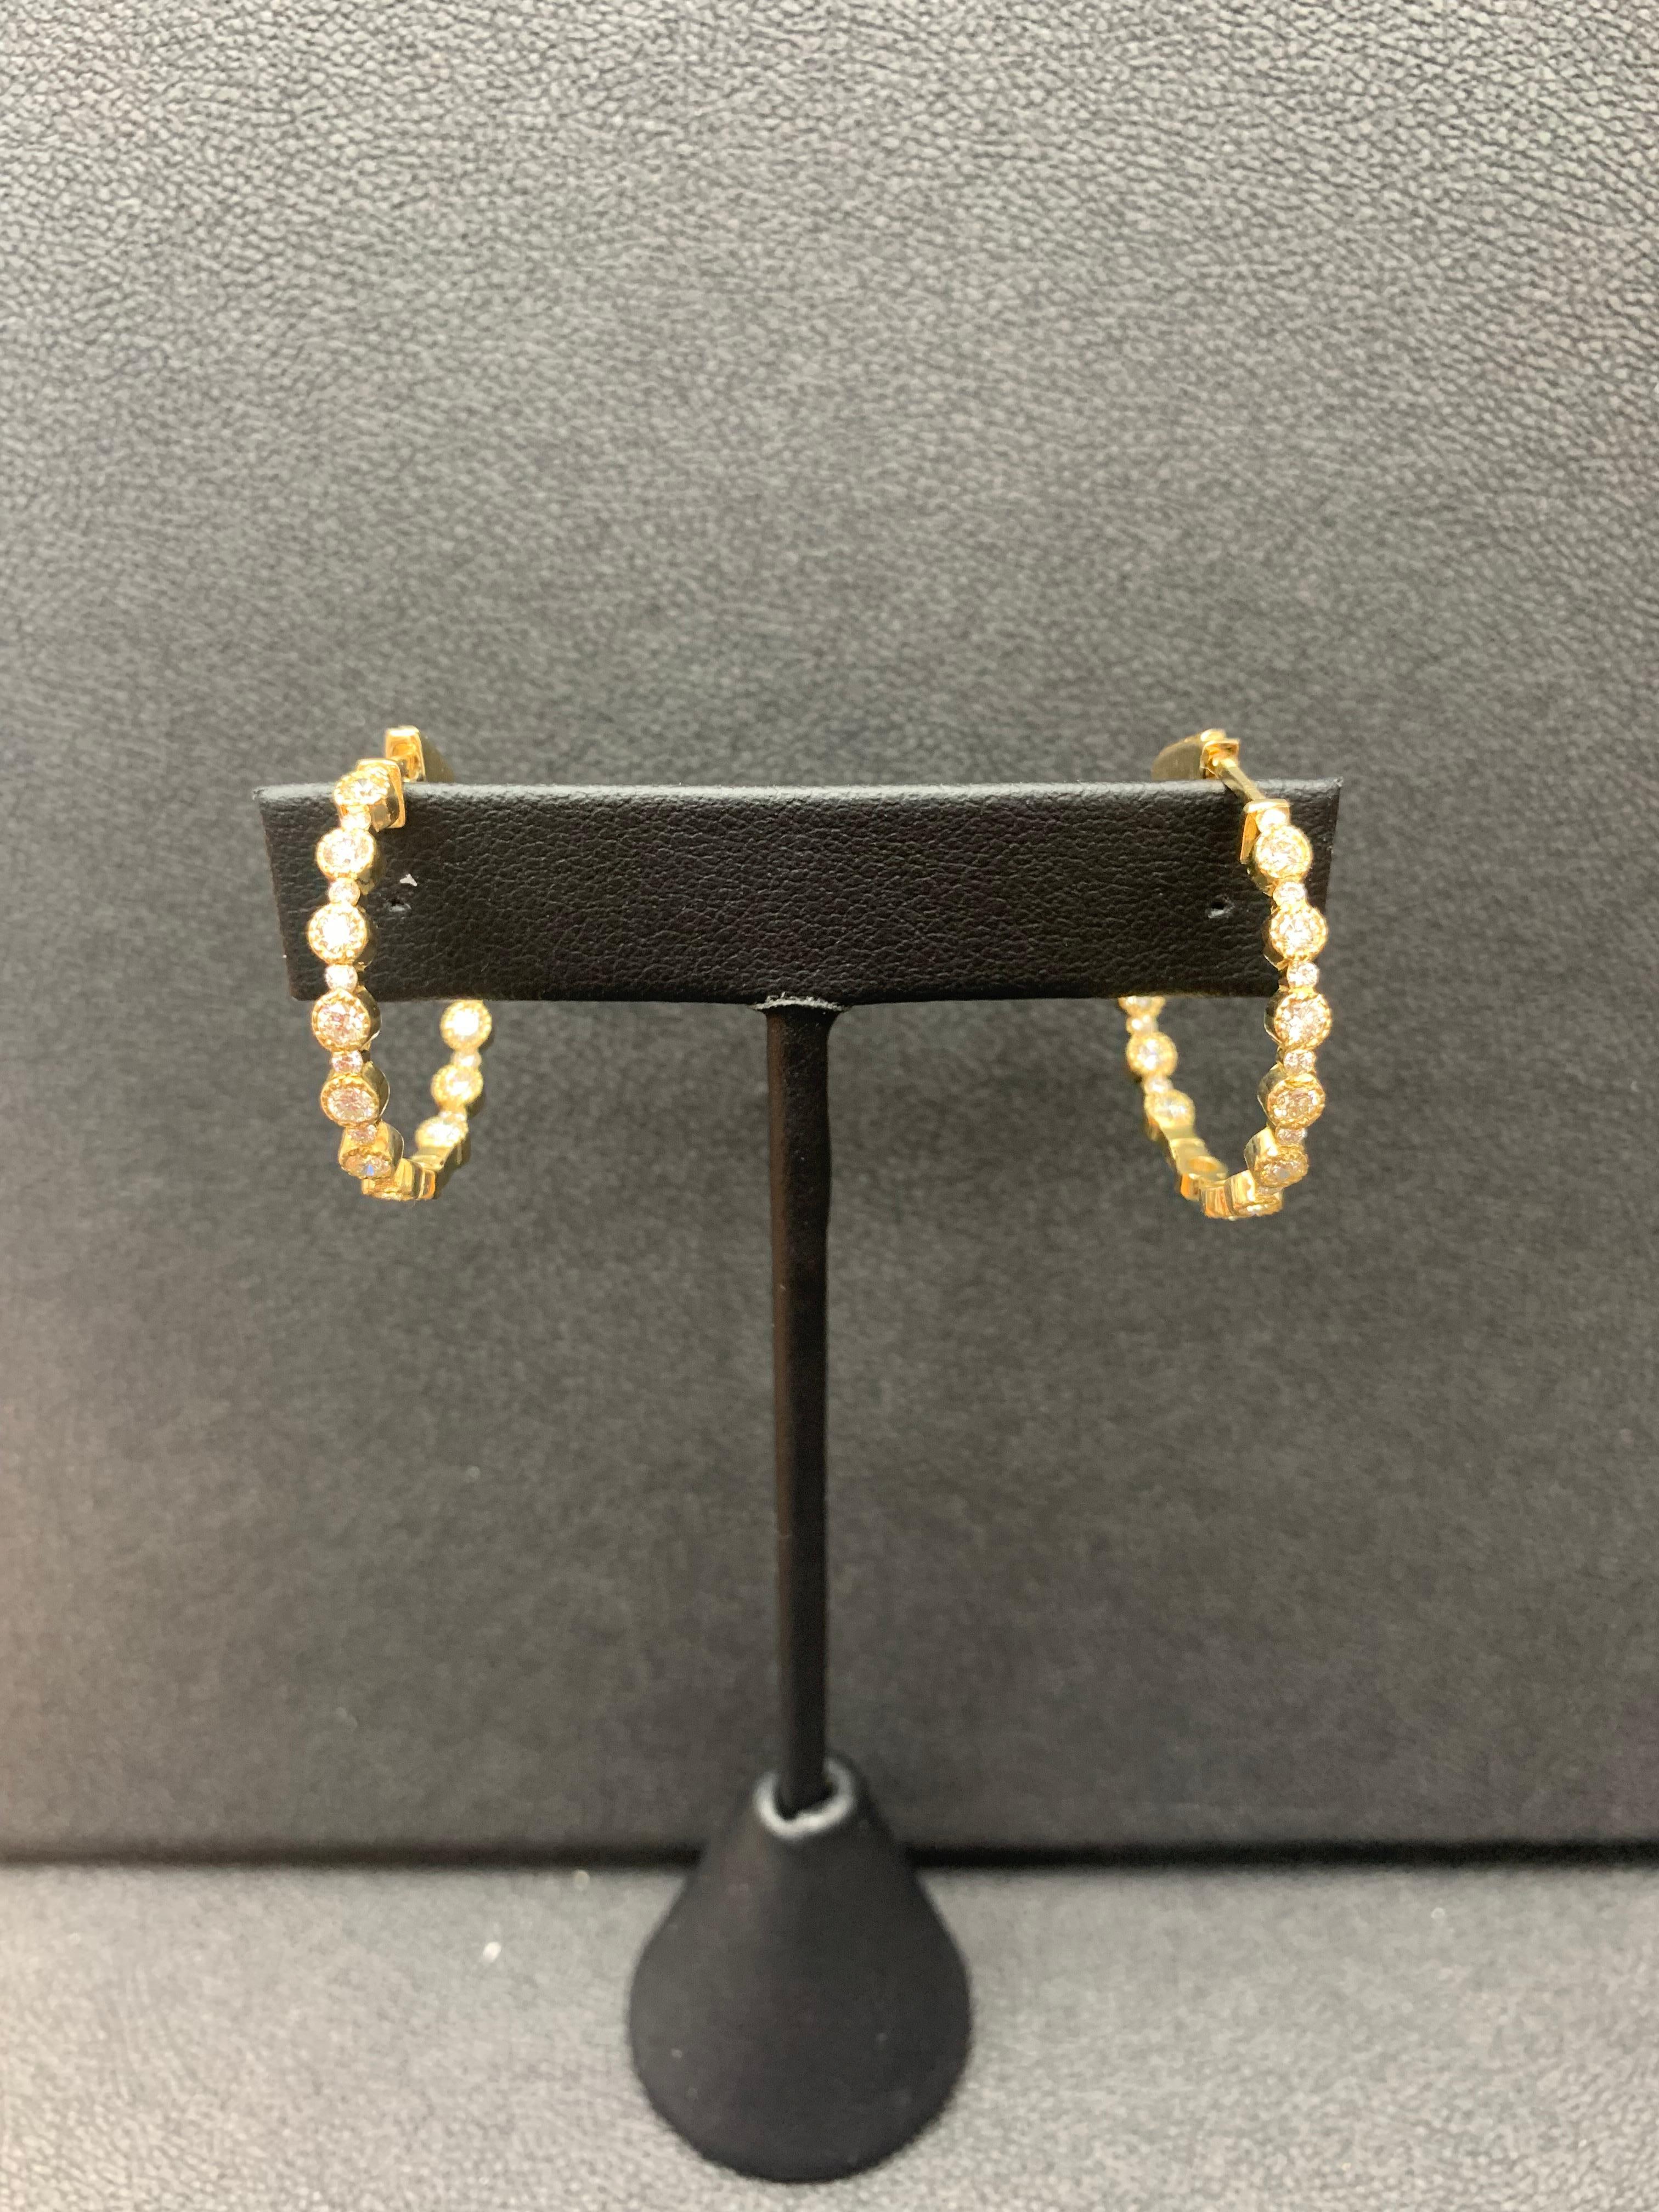 Gorgeous and classic diamond hoop earrings. Features dazzling round diamonds set in 14k Yellow Gold to maximize the brilliance of the diamonds. Total weight of the diamonds is 2.01 carats.

All diamonds are GH color SI1 Clarity.
Available in Yellow